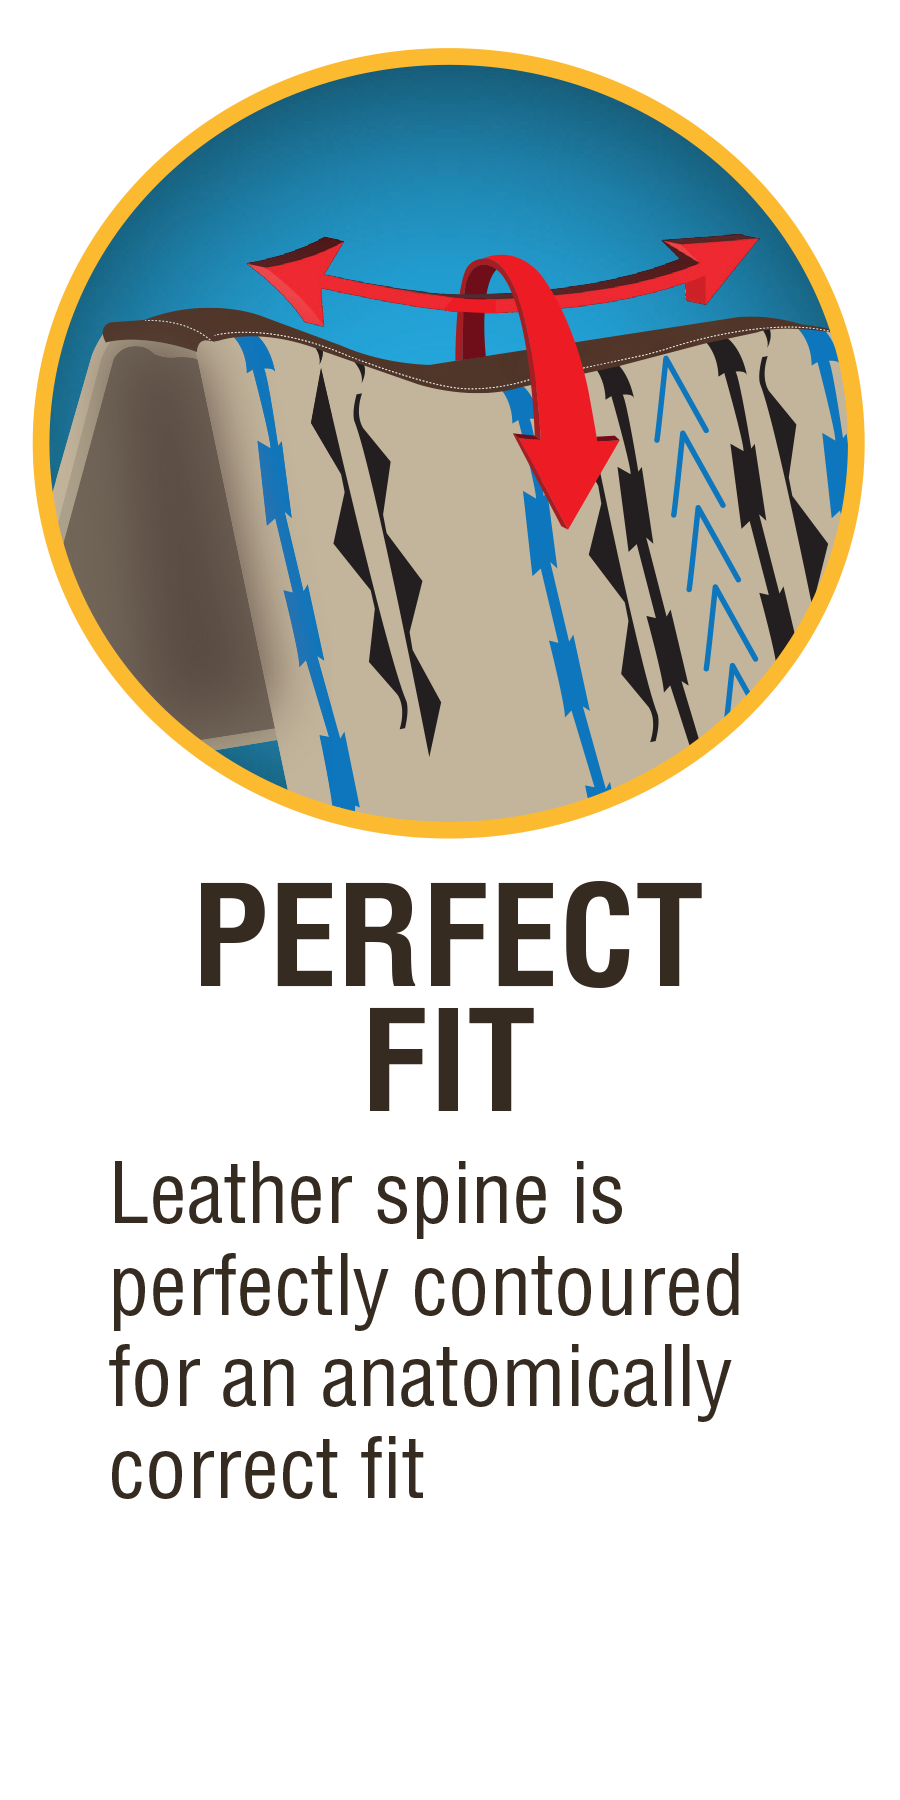 Perfect Fit Leather spine is perfectly contoured for an anatomically correct fit